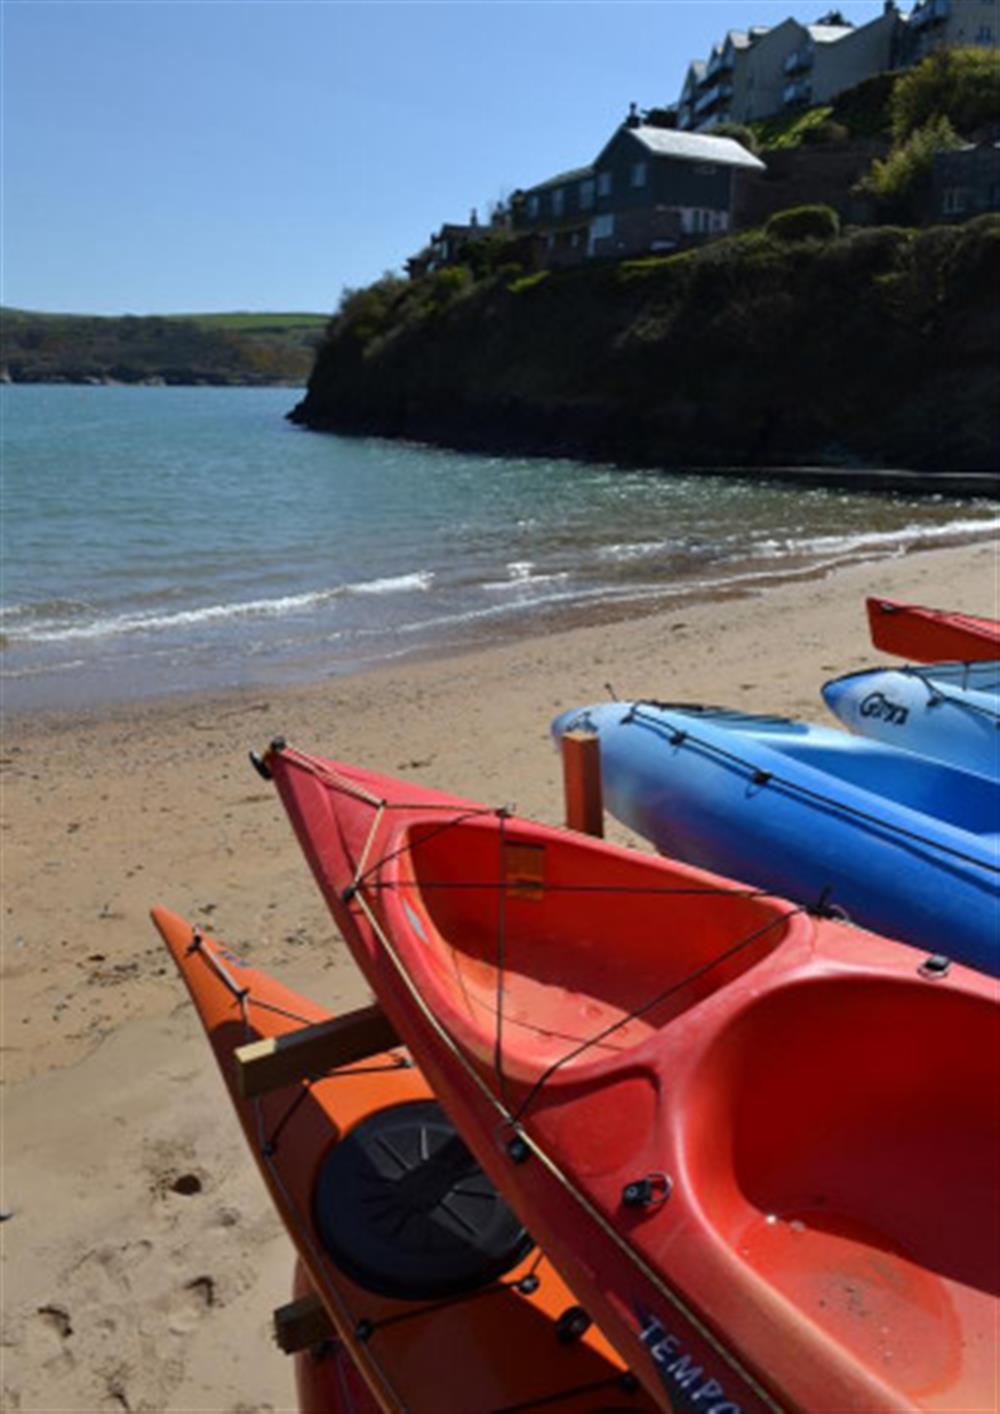 Watersports at South Sands at 2 Ringrone in Salcombe